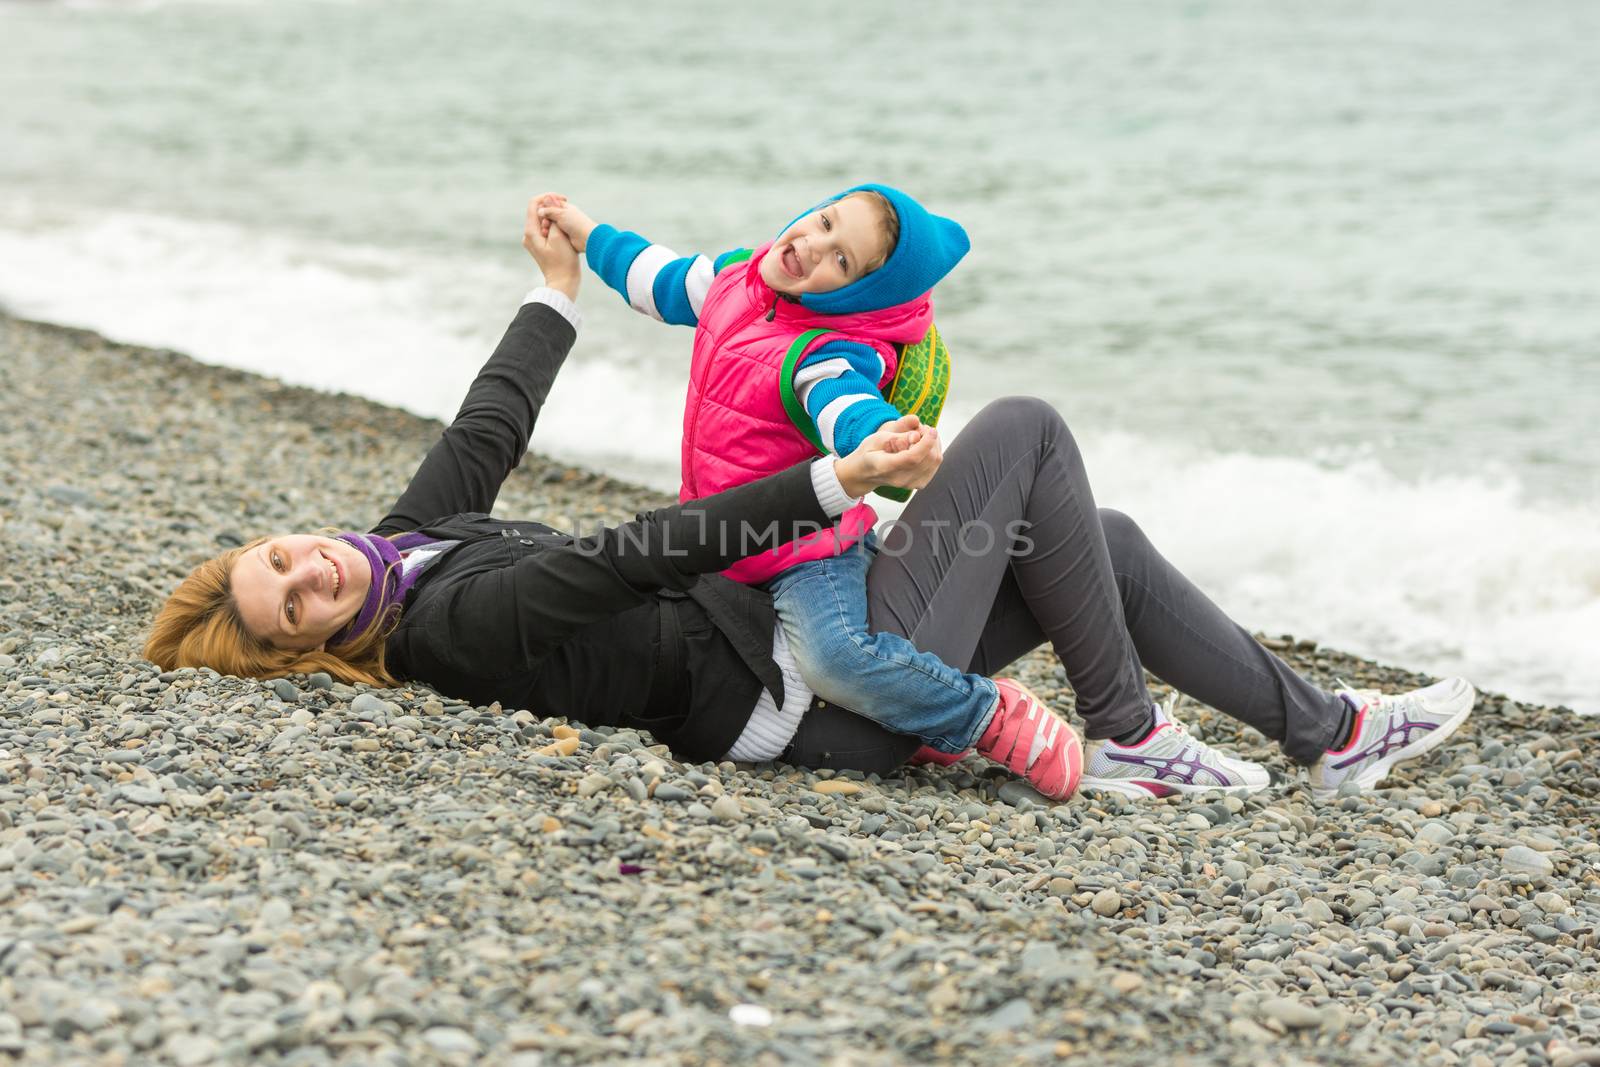 Five-year girl with her mother having fun on the beach pebble beach in cold weather by Madhourse